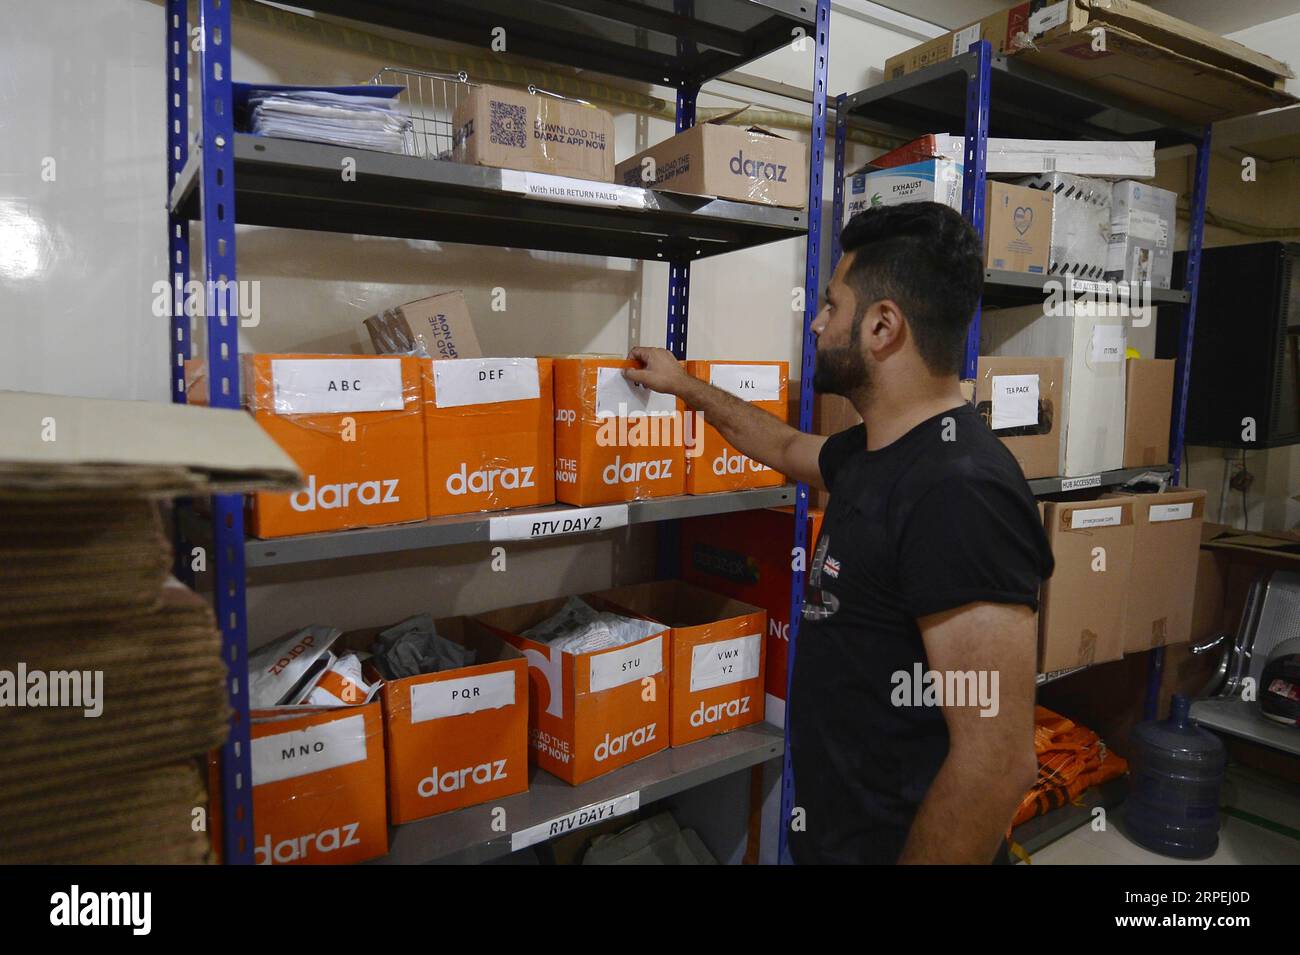 https://c8.alamy.com/comp/2RPEJ0D/190829-islamabad-aug-29-2019-a-staff-member-of-a-daraz-outlet-checks-packages-in-islamabad-capital-of-pakistan-on-aug-29-2019-with-increasing-digitization-and-internet-accessibility-e-commerce-market-of-pakistan-is-becoming-one-of-the-fastest-growing-markets-across-the-globe-with-a-considerable-surge-in-online-merchants-e-commercial-platforms-and-online-payment-facilities-in-recent-times-to-go-with-spotlight-pakistani-entrepreneurs-eye-chinese-cooperation-to-augment-booming-e-commerce-market-photo-by-xinhua-pakistan-islamabad-e-commerce-market-ahmadxkamal-publicationxno-2RPEJ0D.jpg